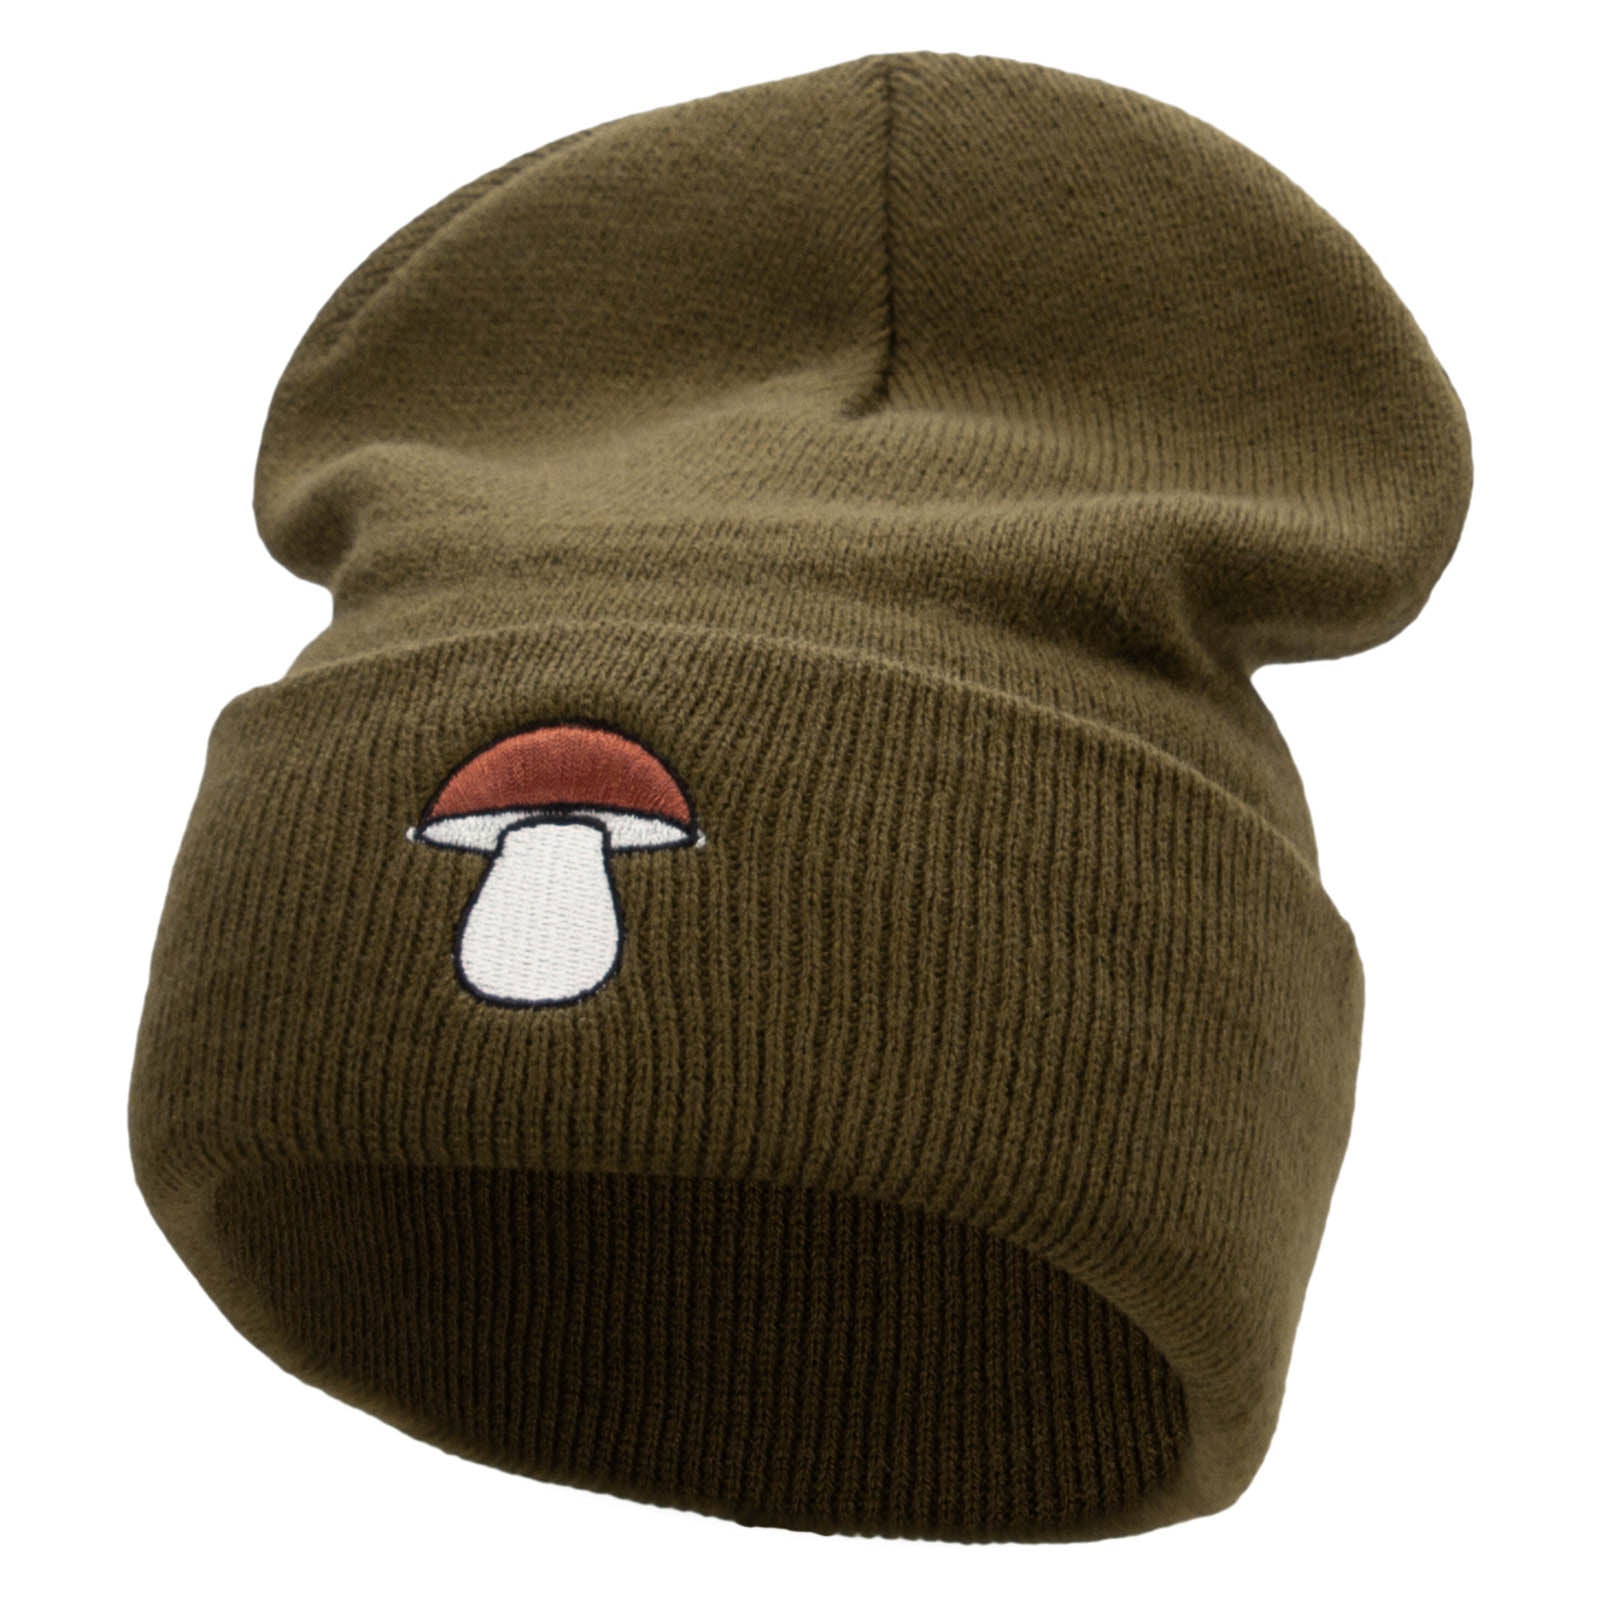 Porcini Shroom Embroidered 12 Inch Long Knitted Beanie - Olive OSFM